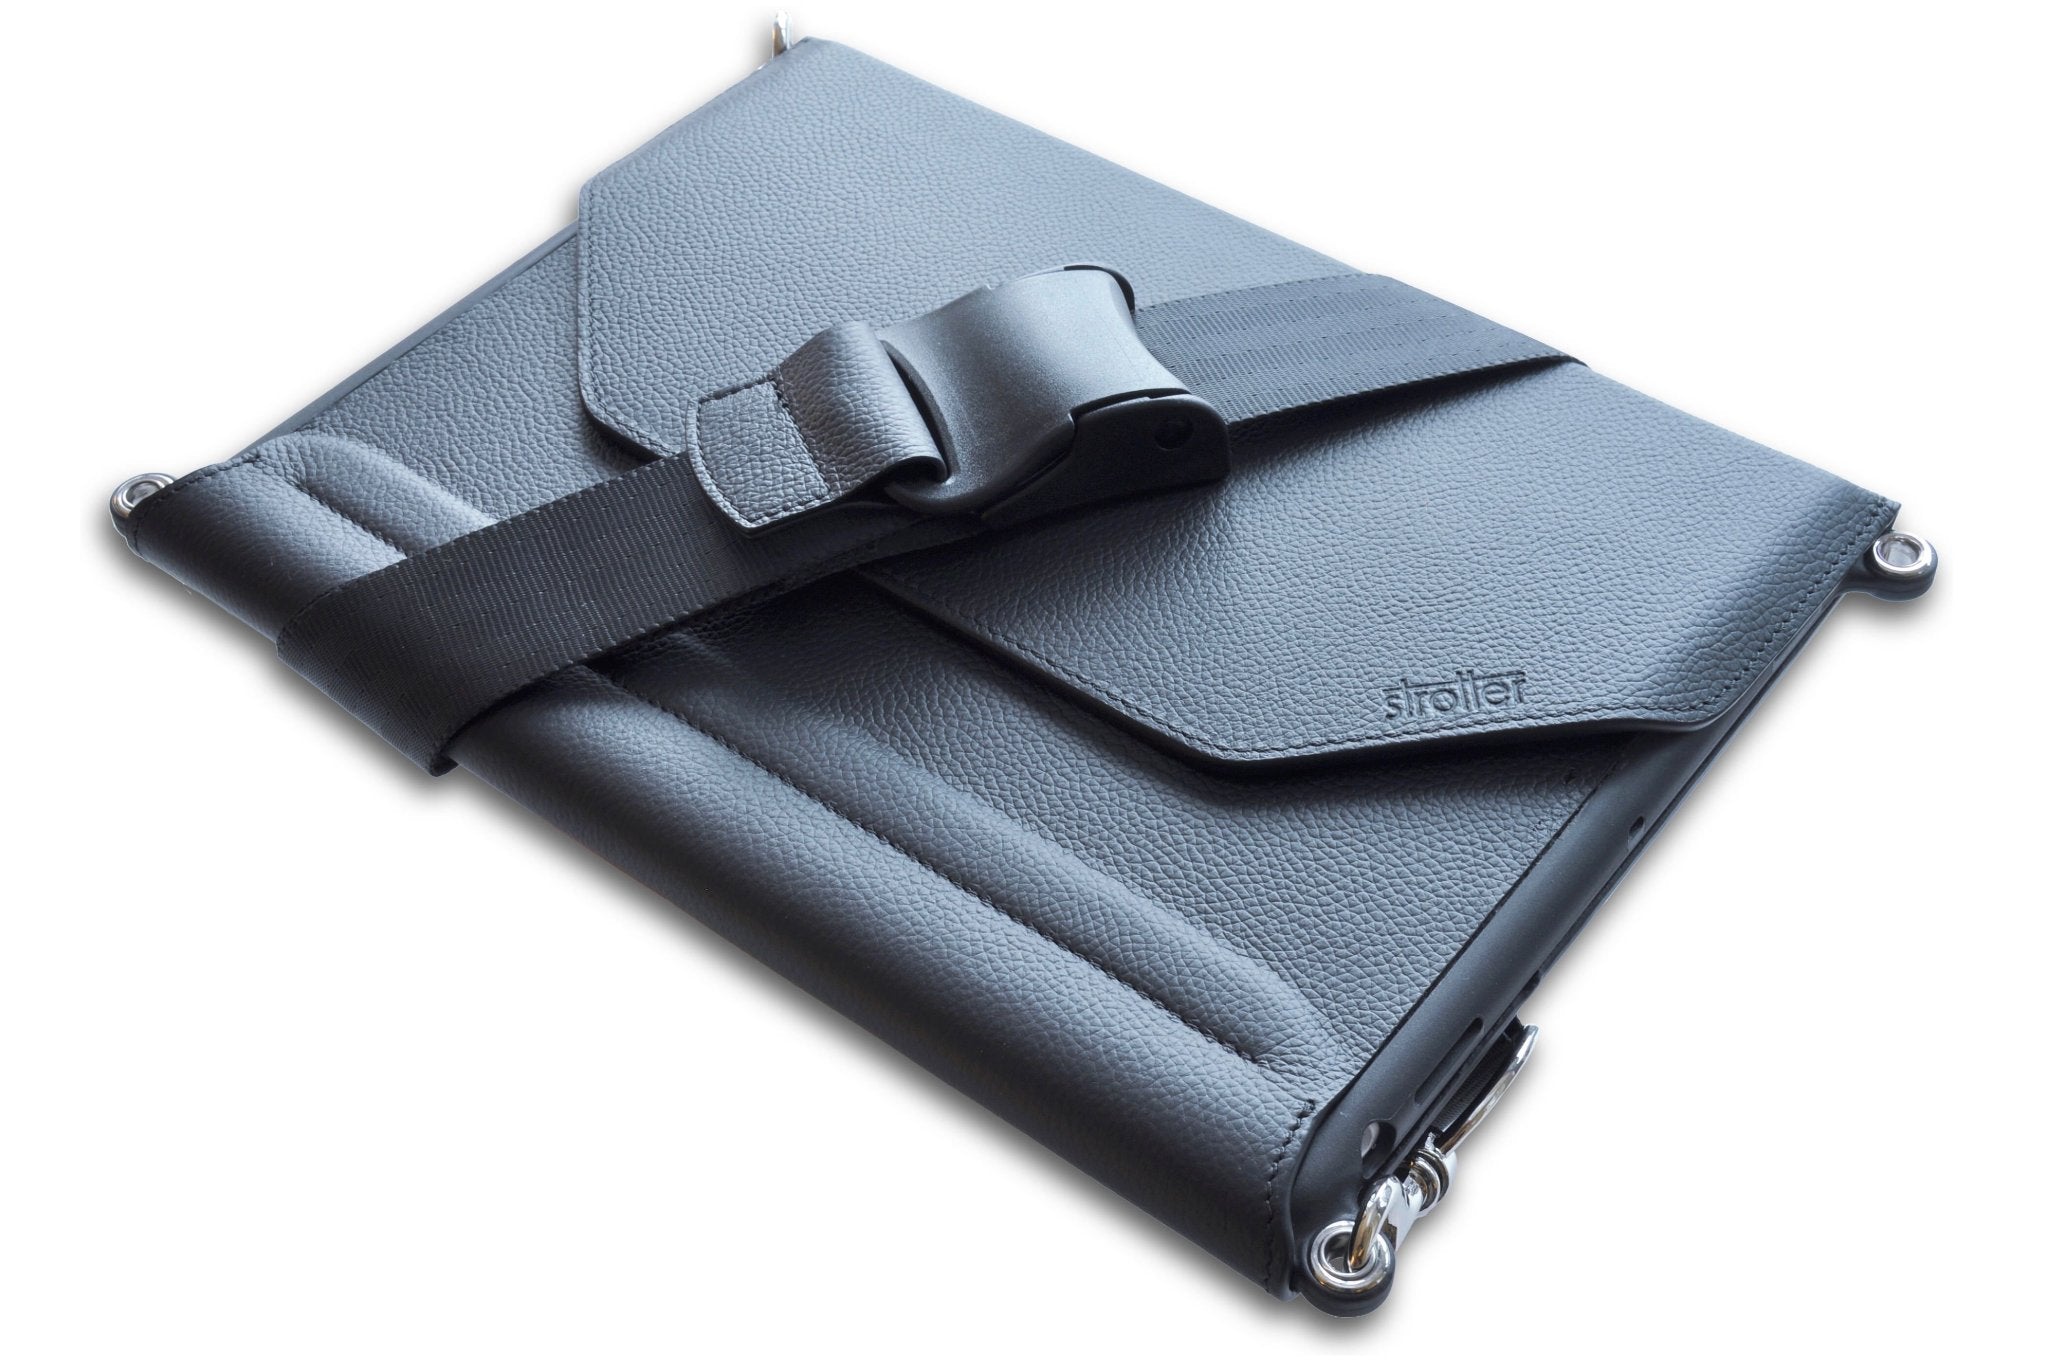 Leather Sleeve for iPad with zipper pocket – Geometric Goods